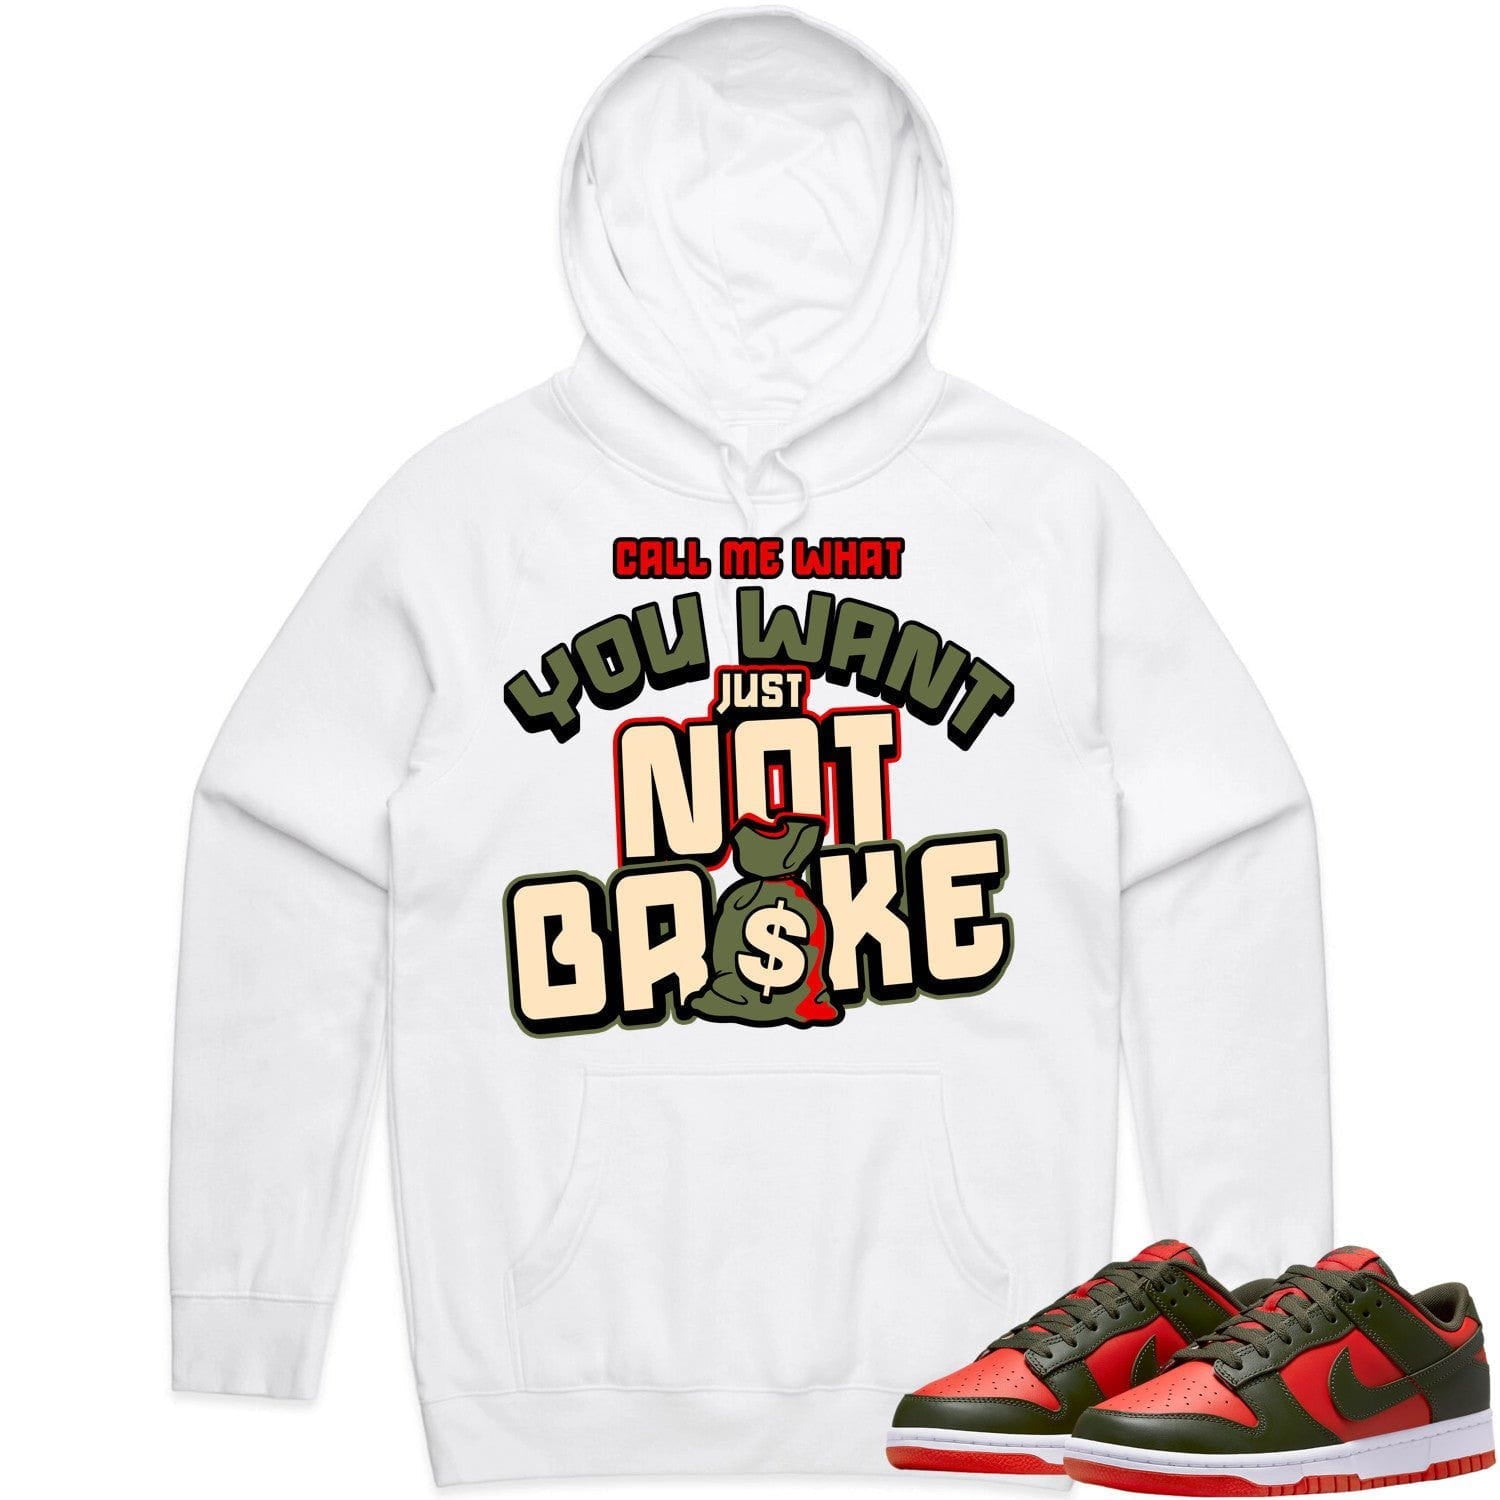 Mystic Red Dunks Hoodie - Olive Red Dunks Shirts - Olive Not Broke